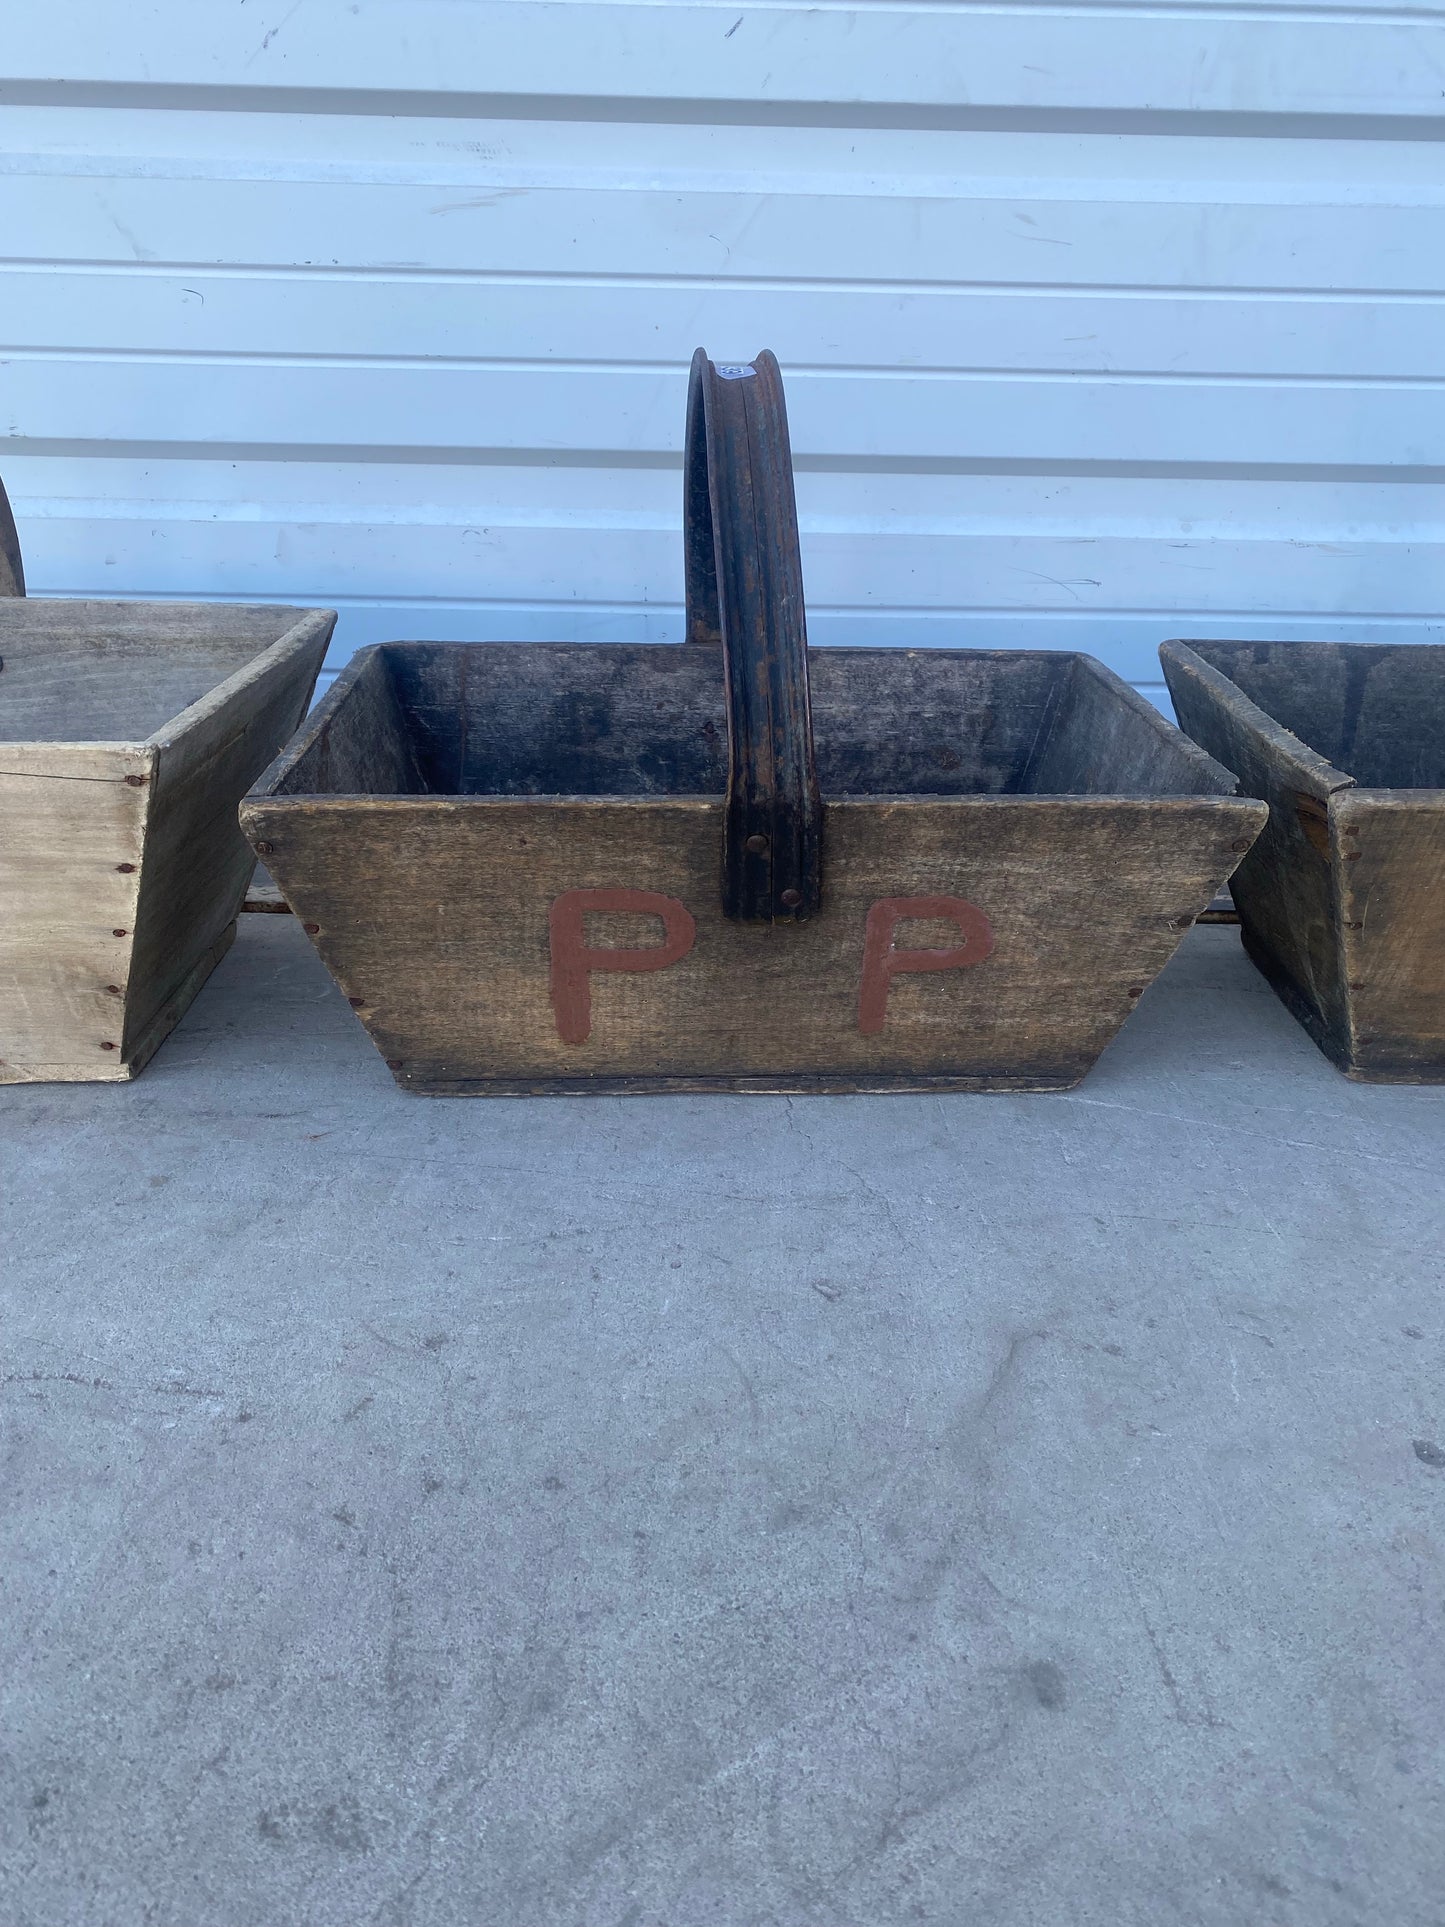 Wooden Gathering Crate with Handle